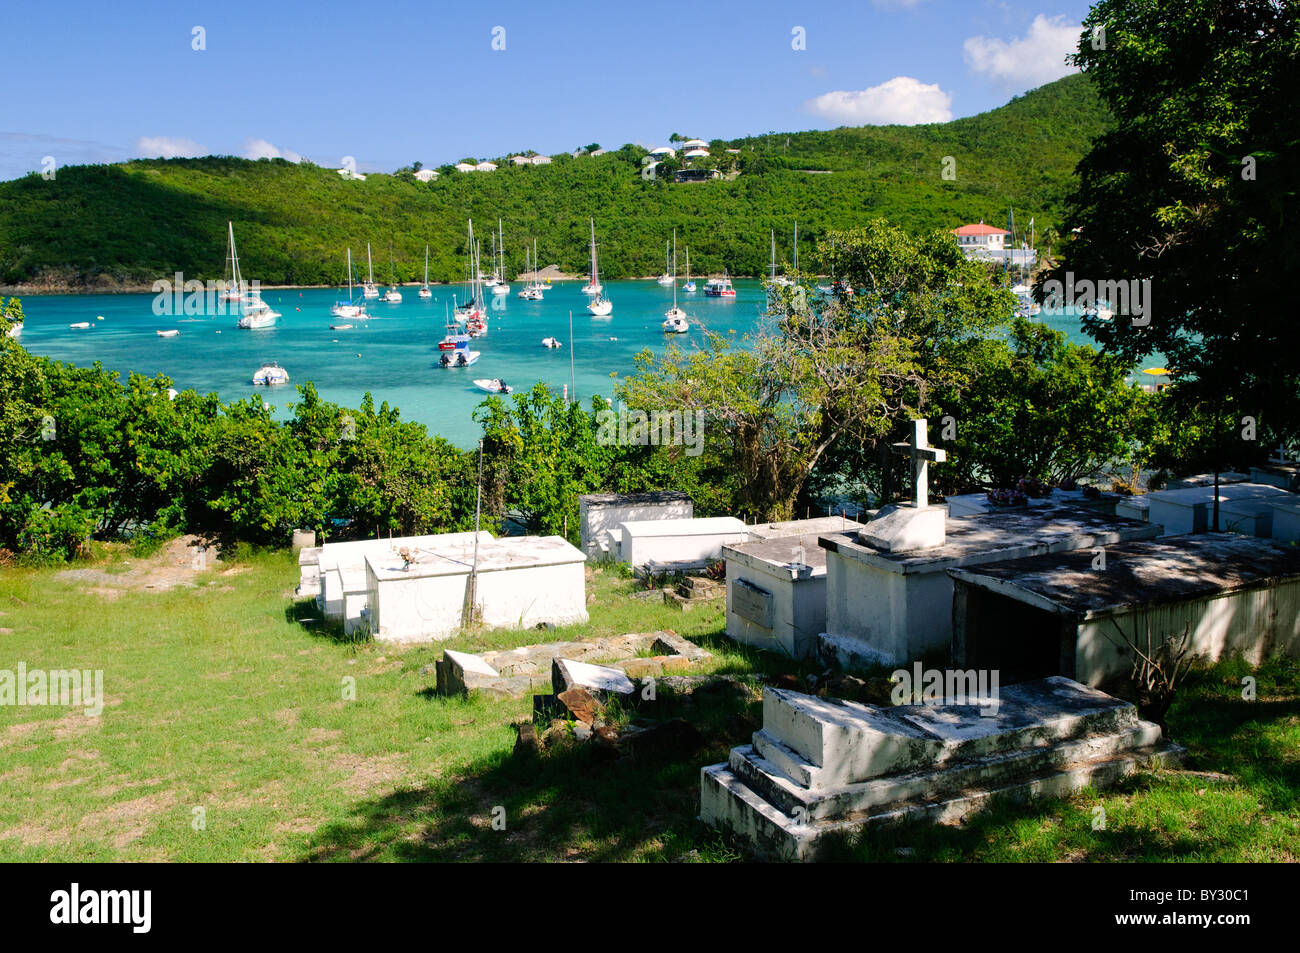 ST JOHN, US Virgin Islands - The cemetery of Gallows Point is in the foreground with the natural harbor of Cruz Bay in the background on St. John in the US Virgin Islands Stock Photo